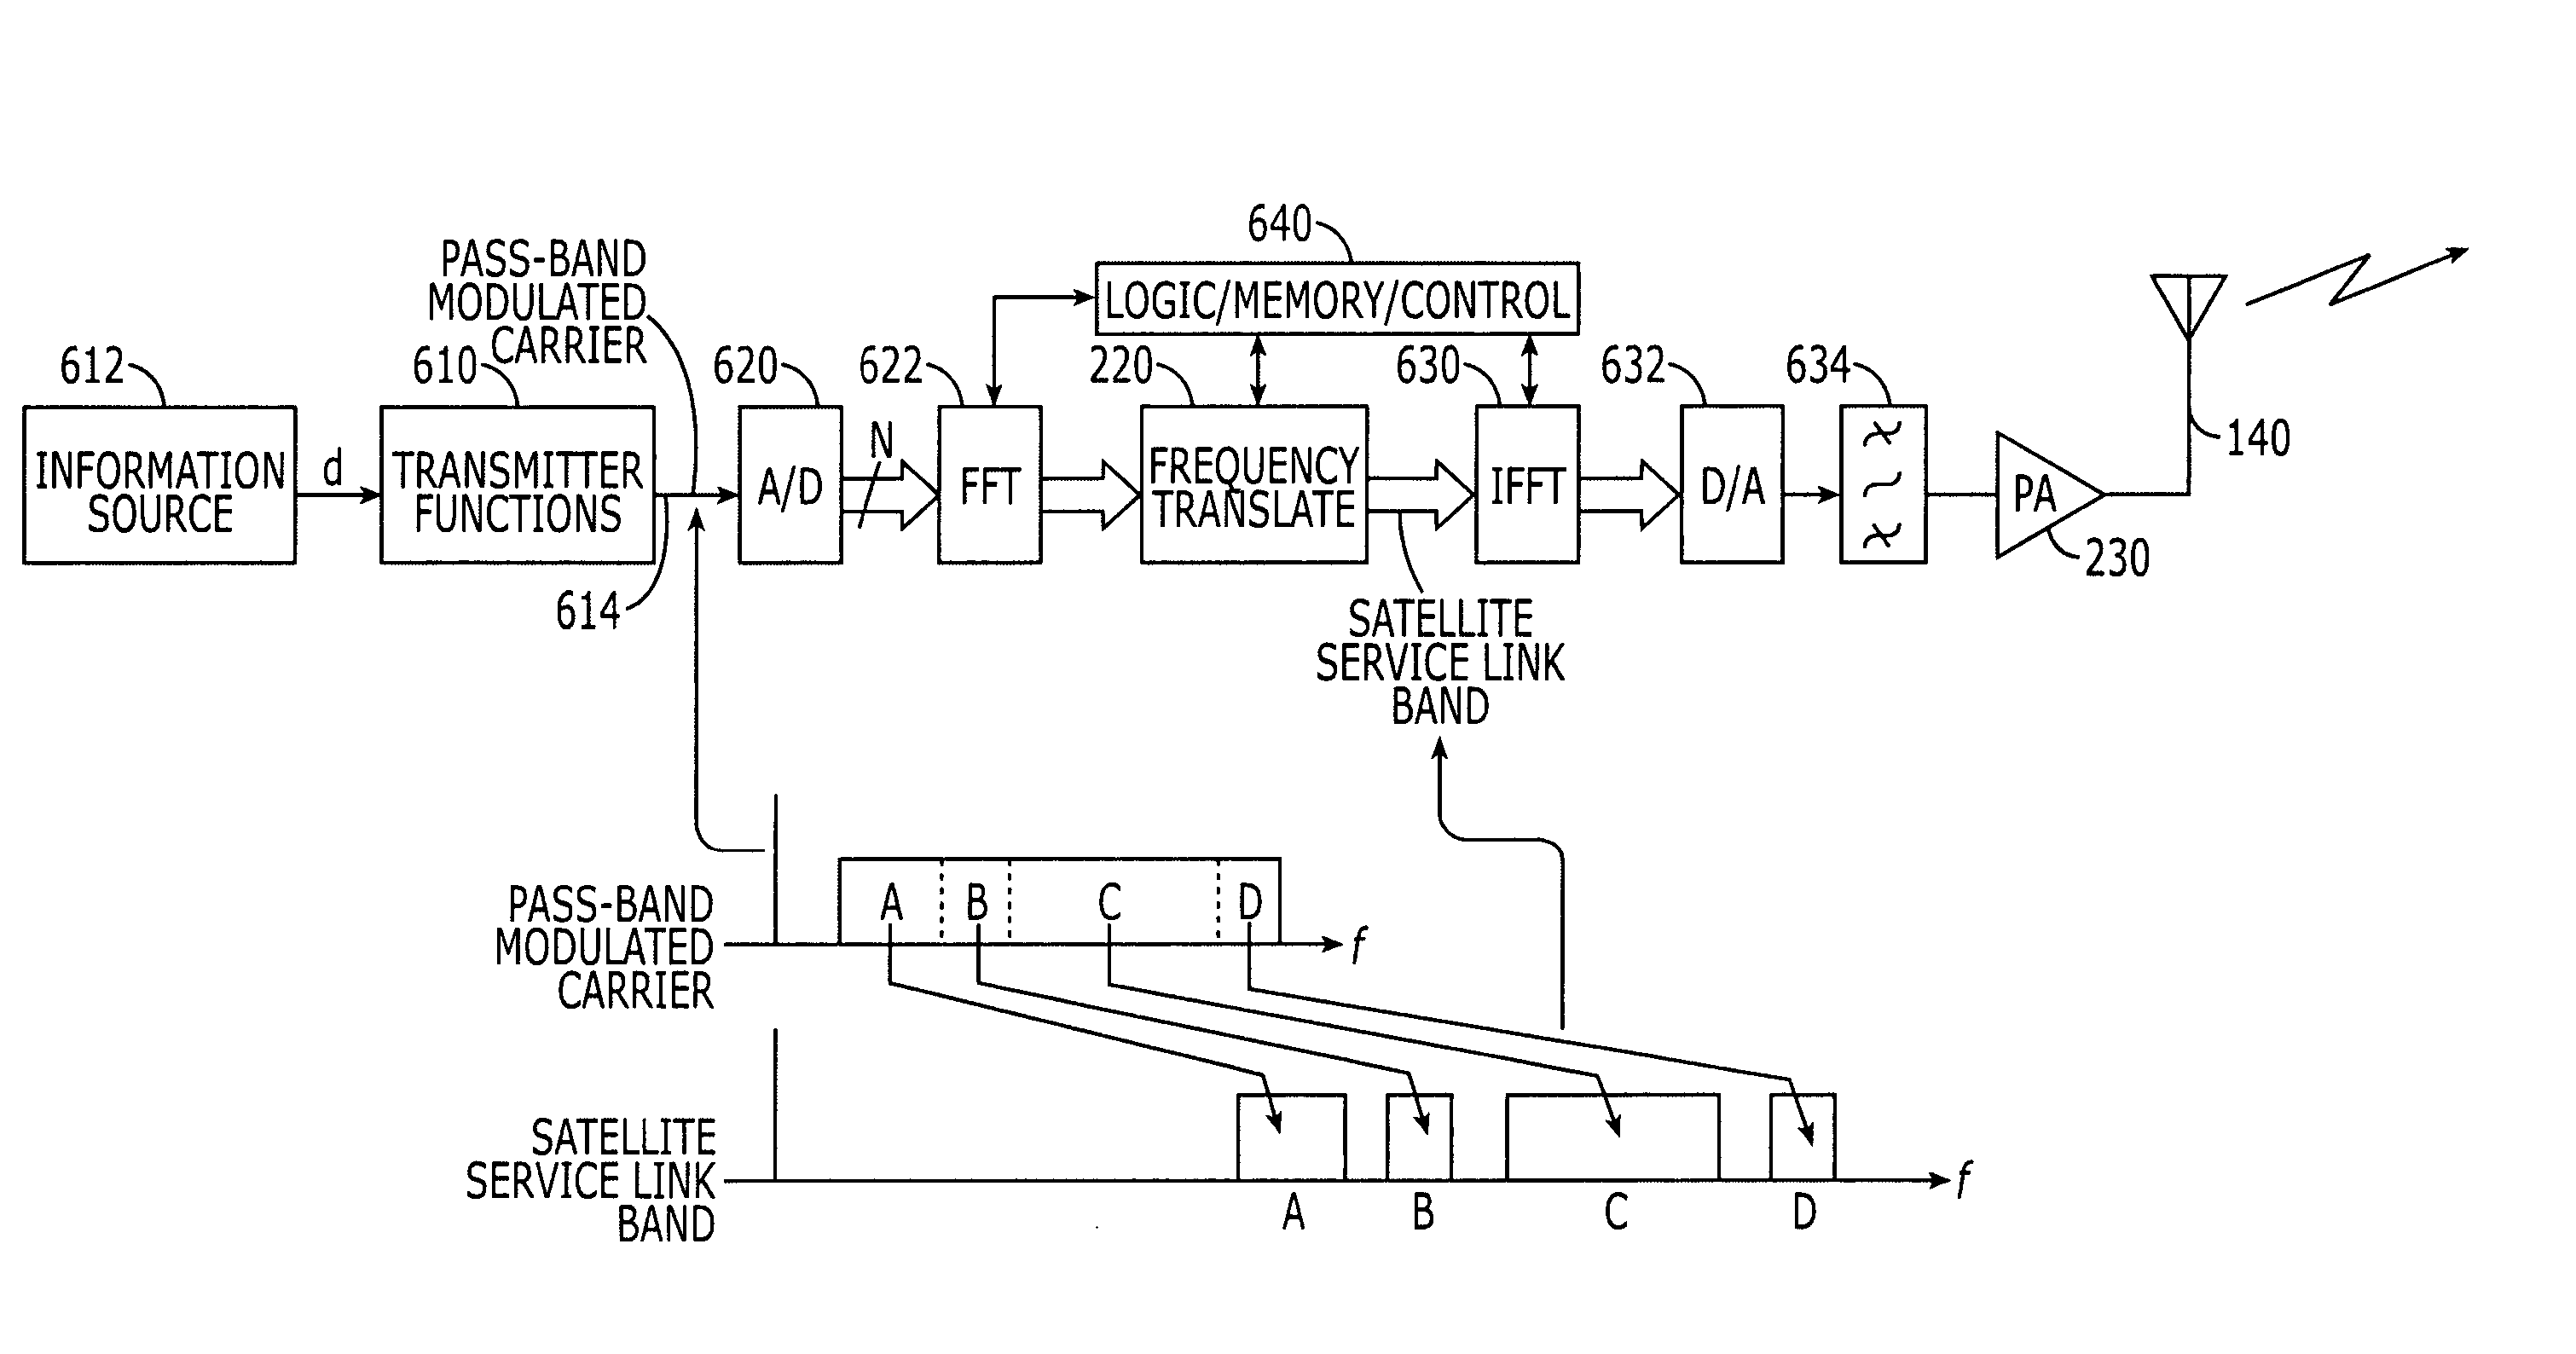 Broadband wireless communications systems and methods using multiple non-contiguous frequency bands/segments